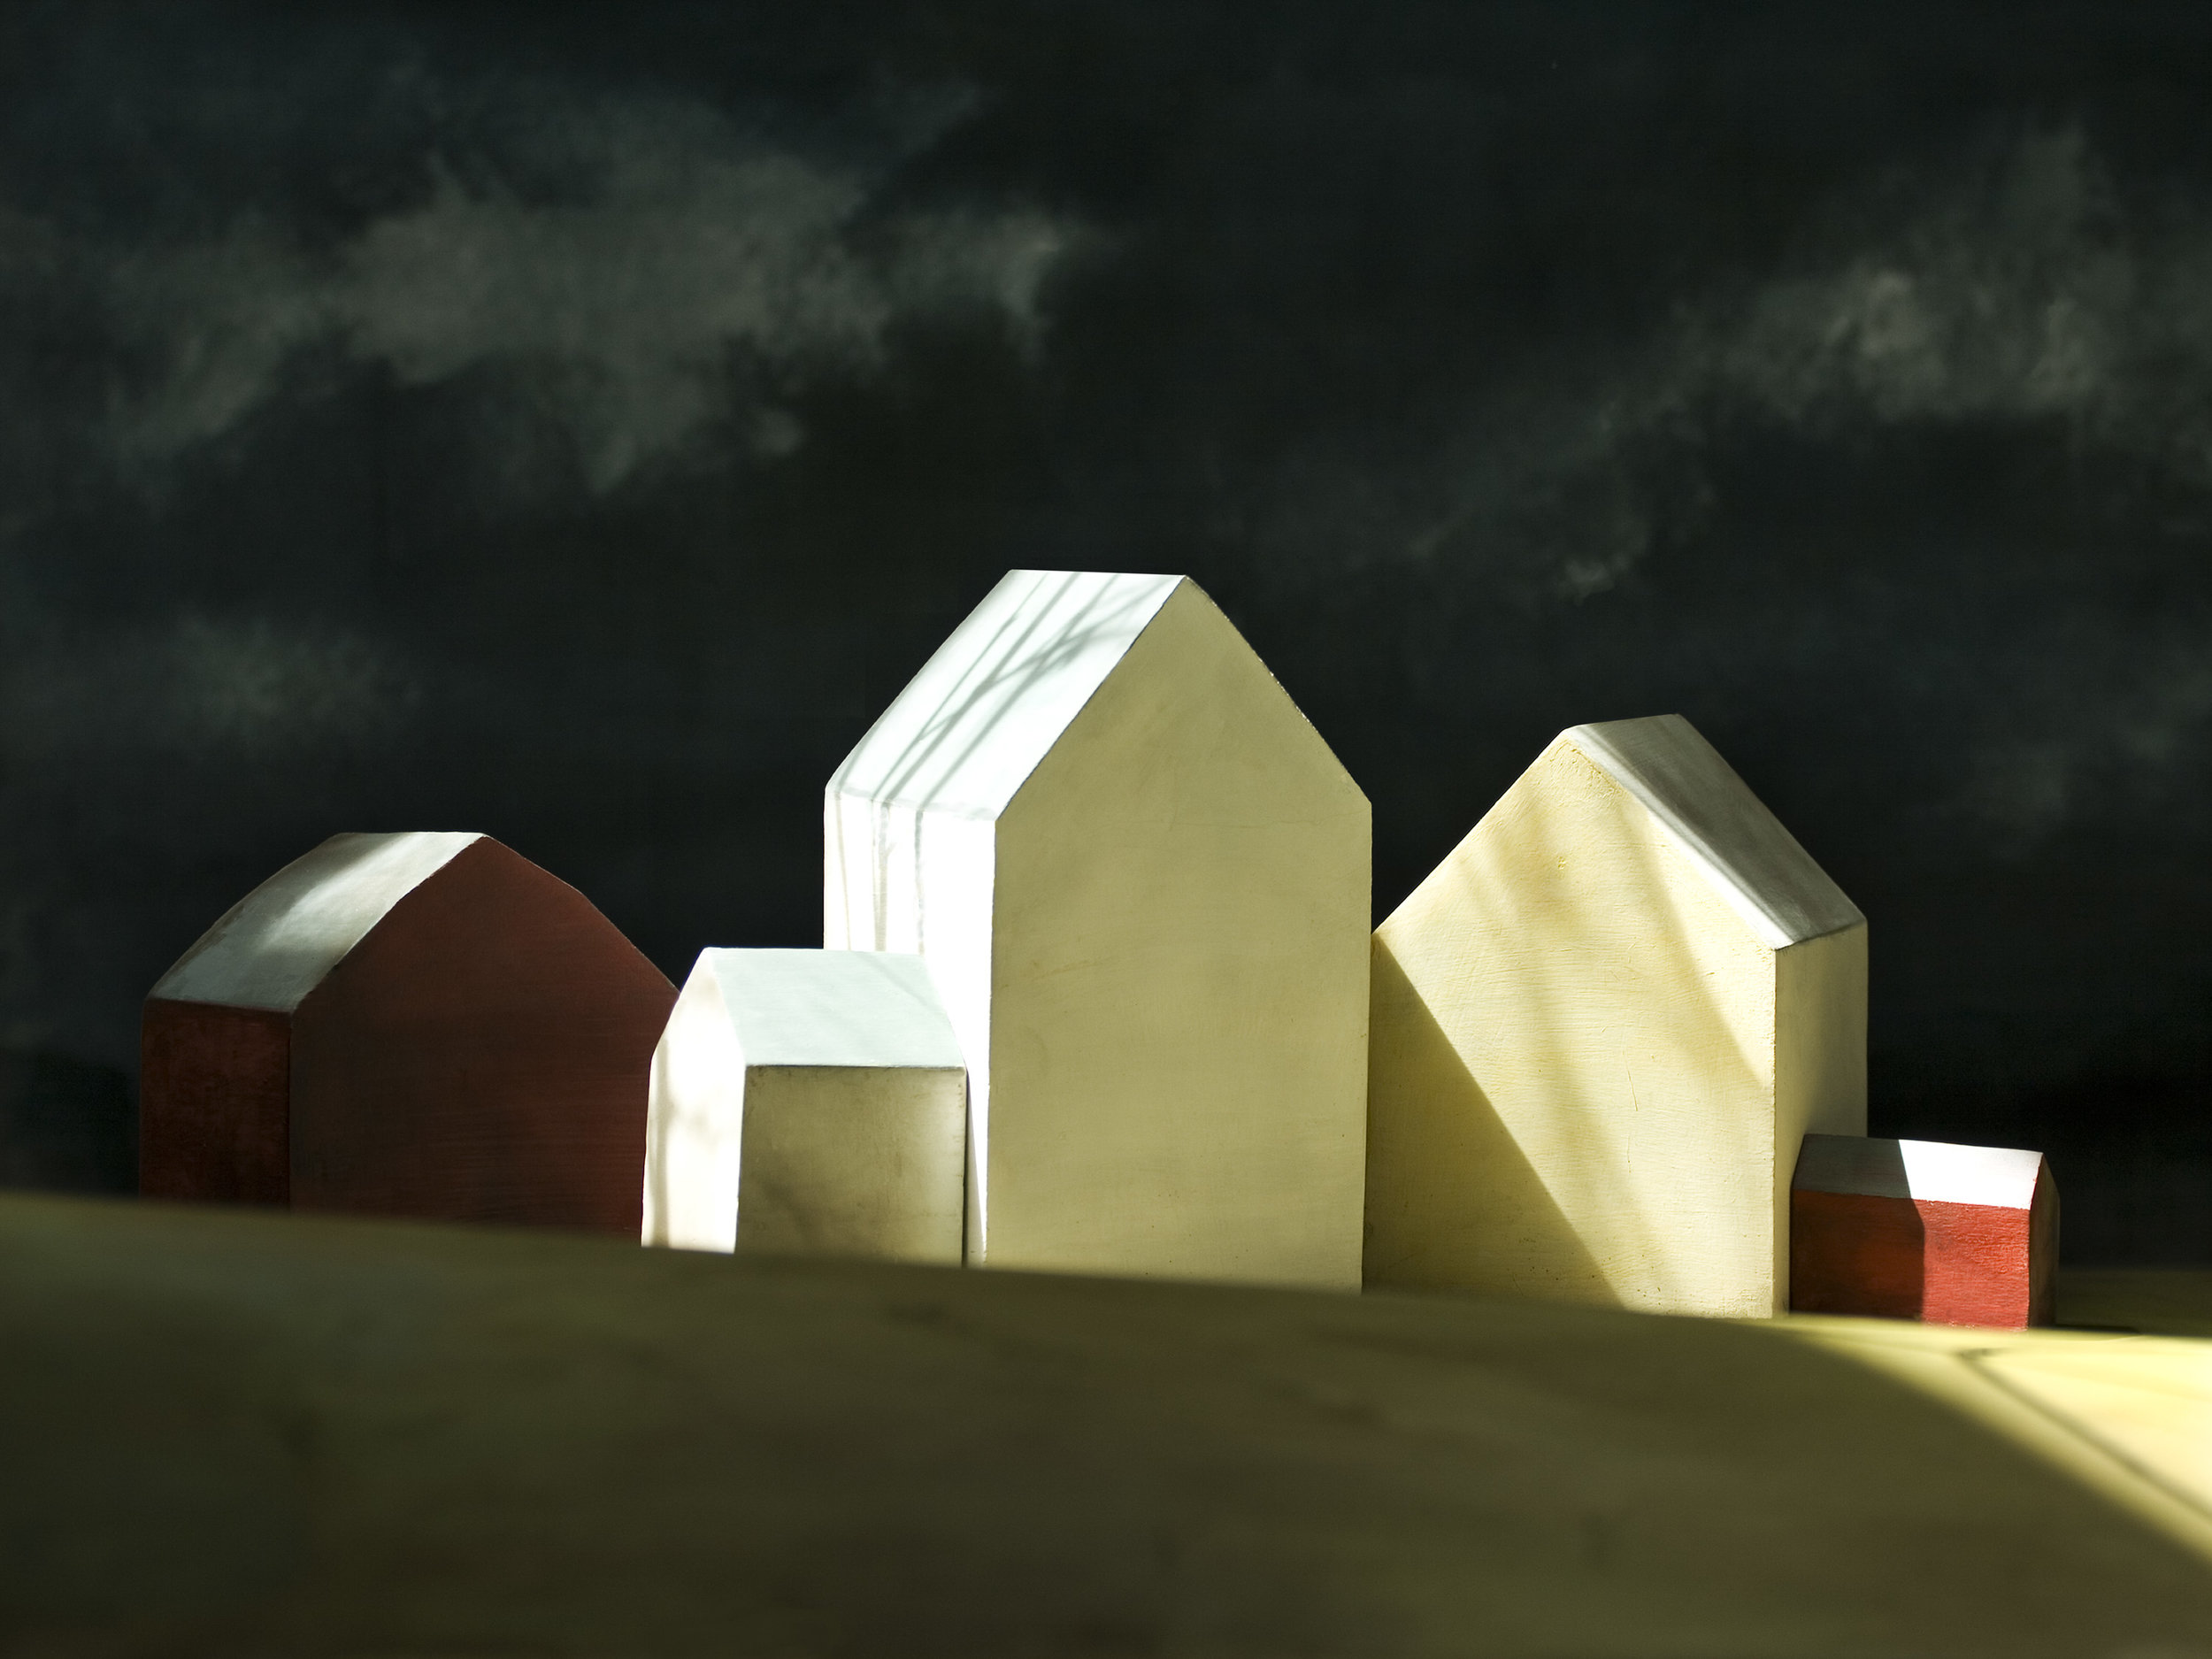 Moonlit Property, 2010, digital photograph, 31 x 39 in, edition of 10, 7 available, $3,200